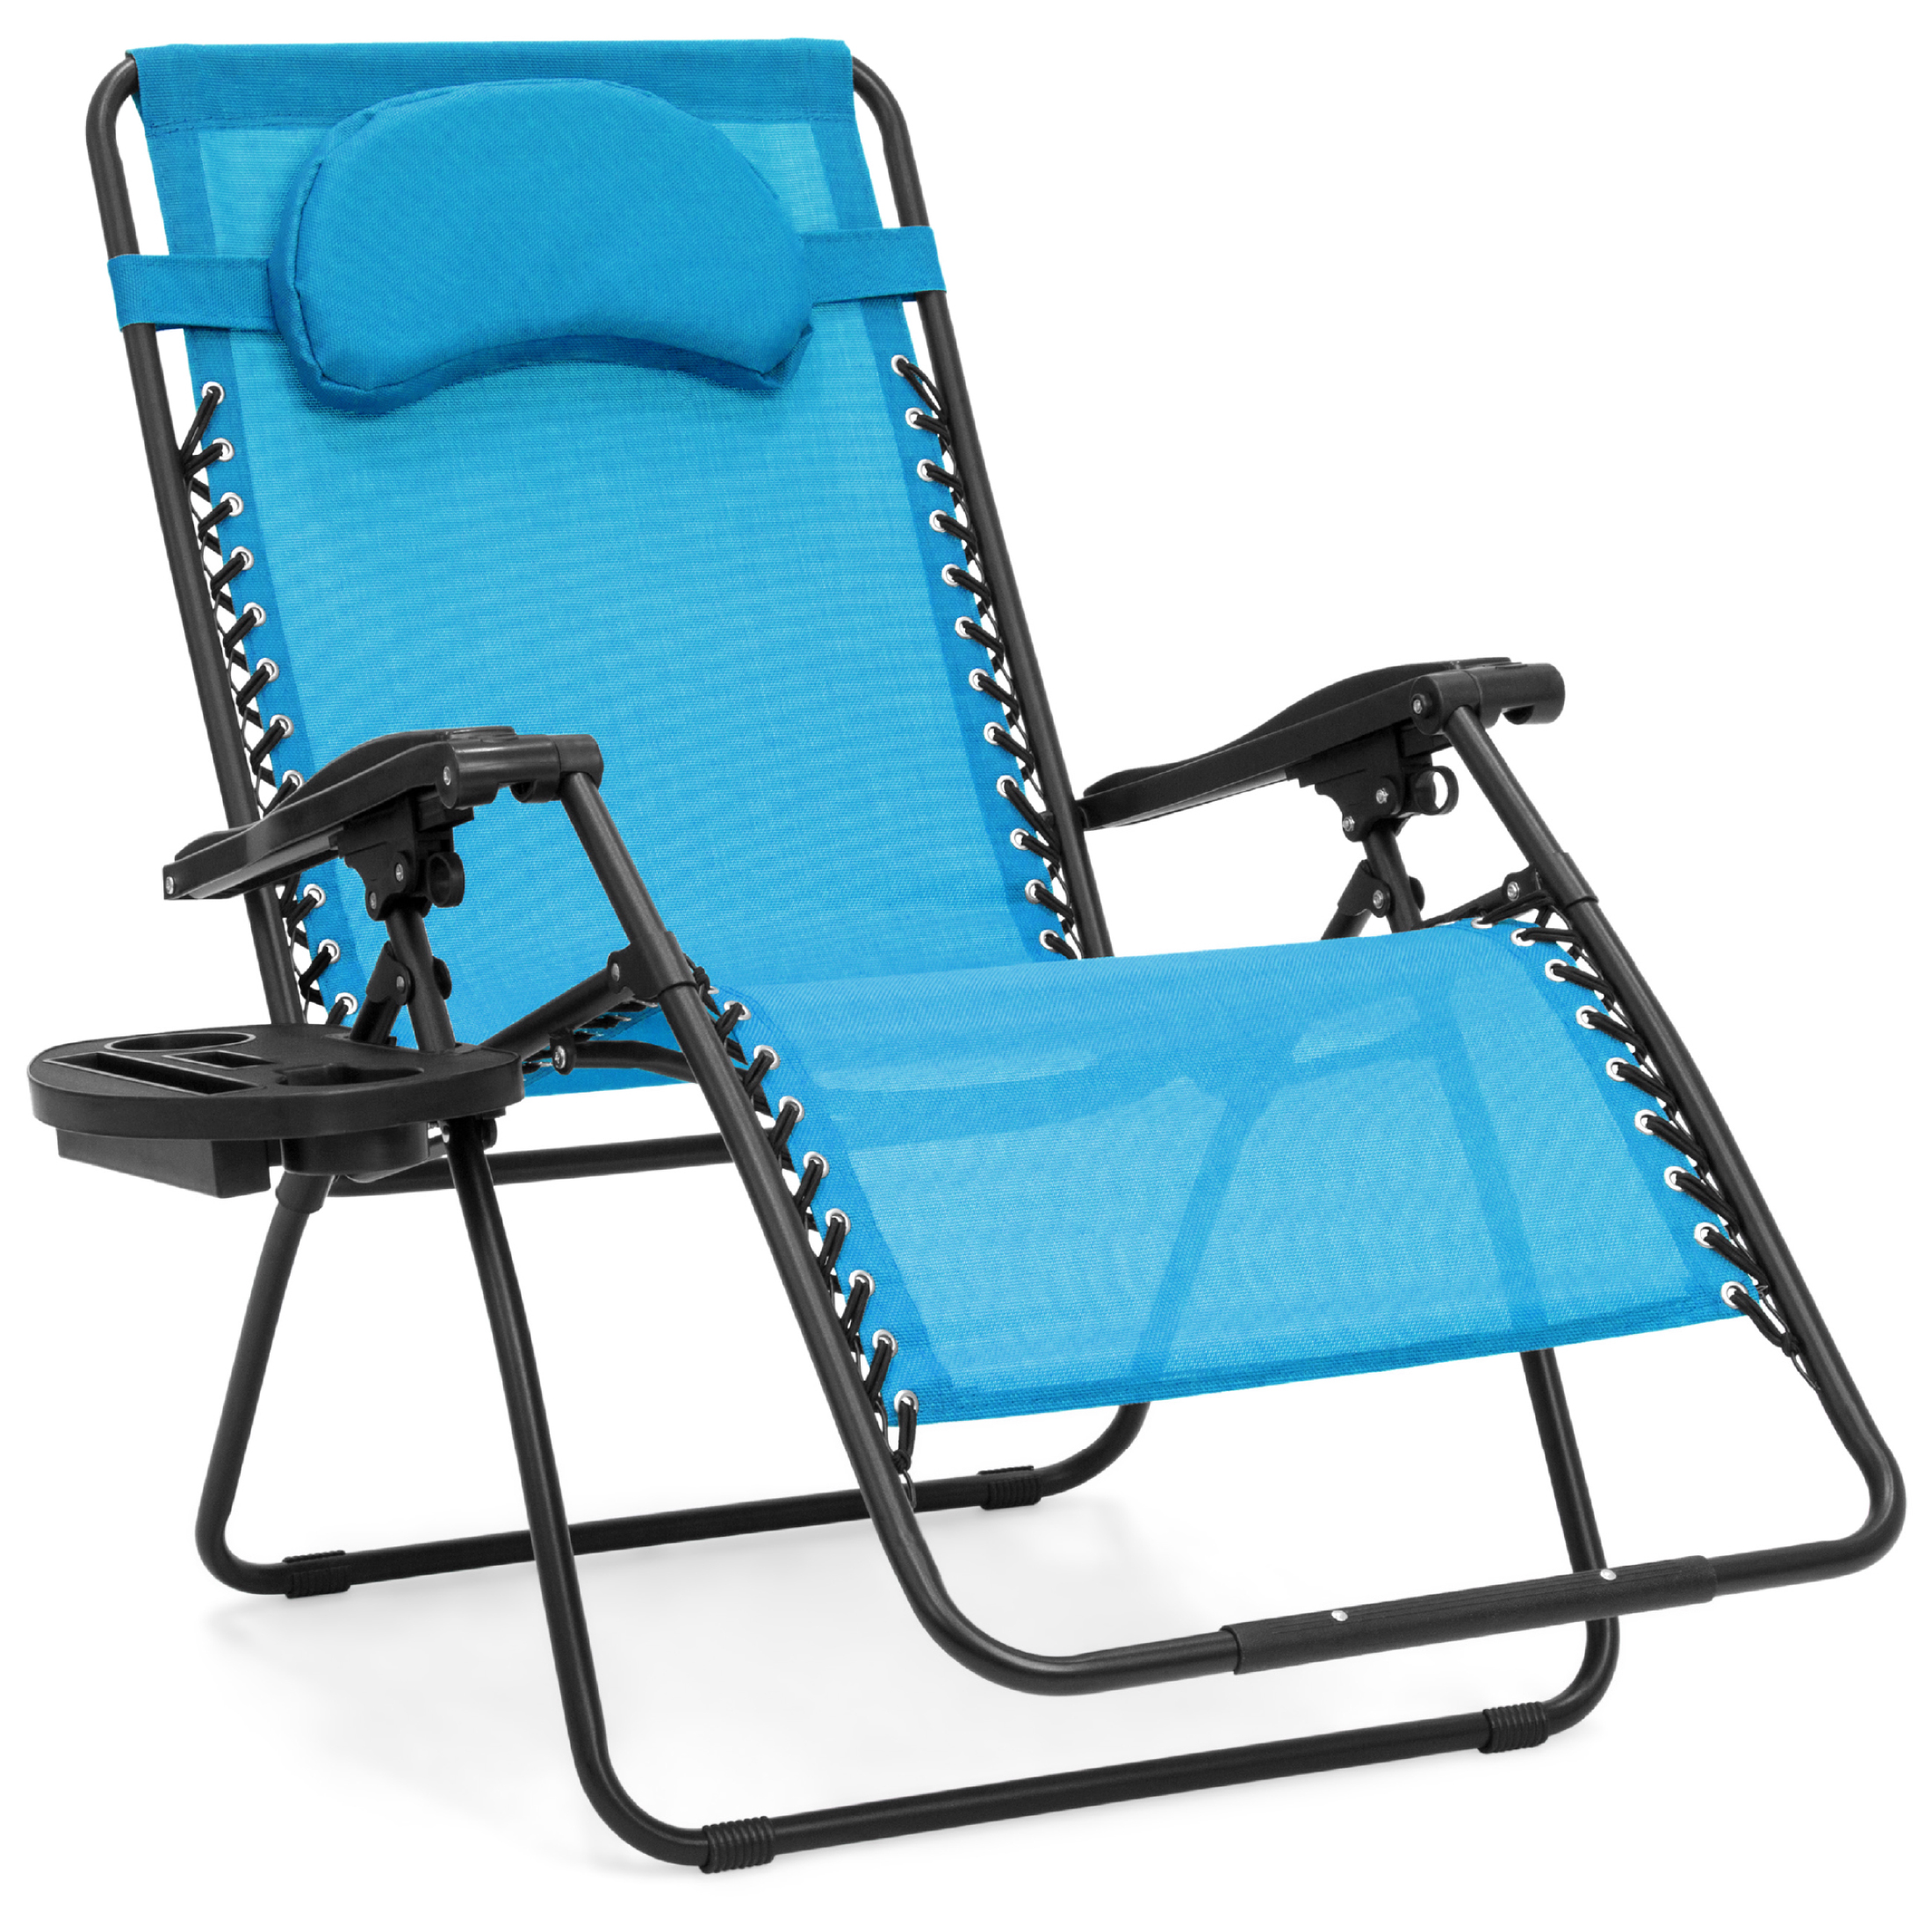 Best Choice Products Oversized Zero Gravity Chair, Folding Outdoor Patio Lounge Recliner w/ Cup Holder - Light Blue - image 1 of 7